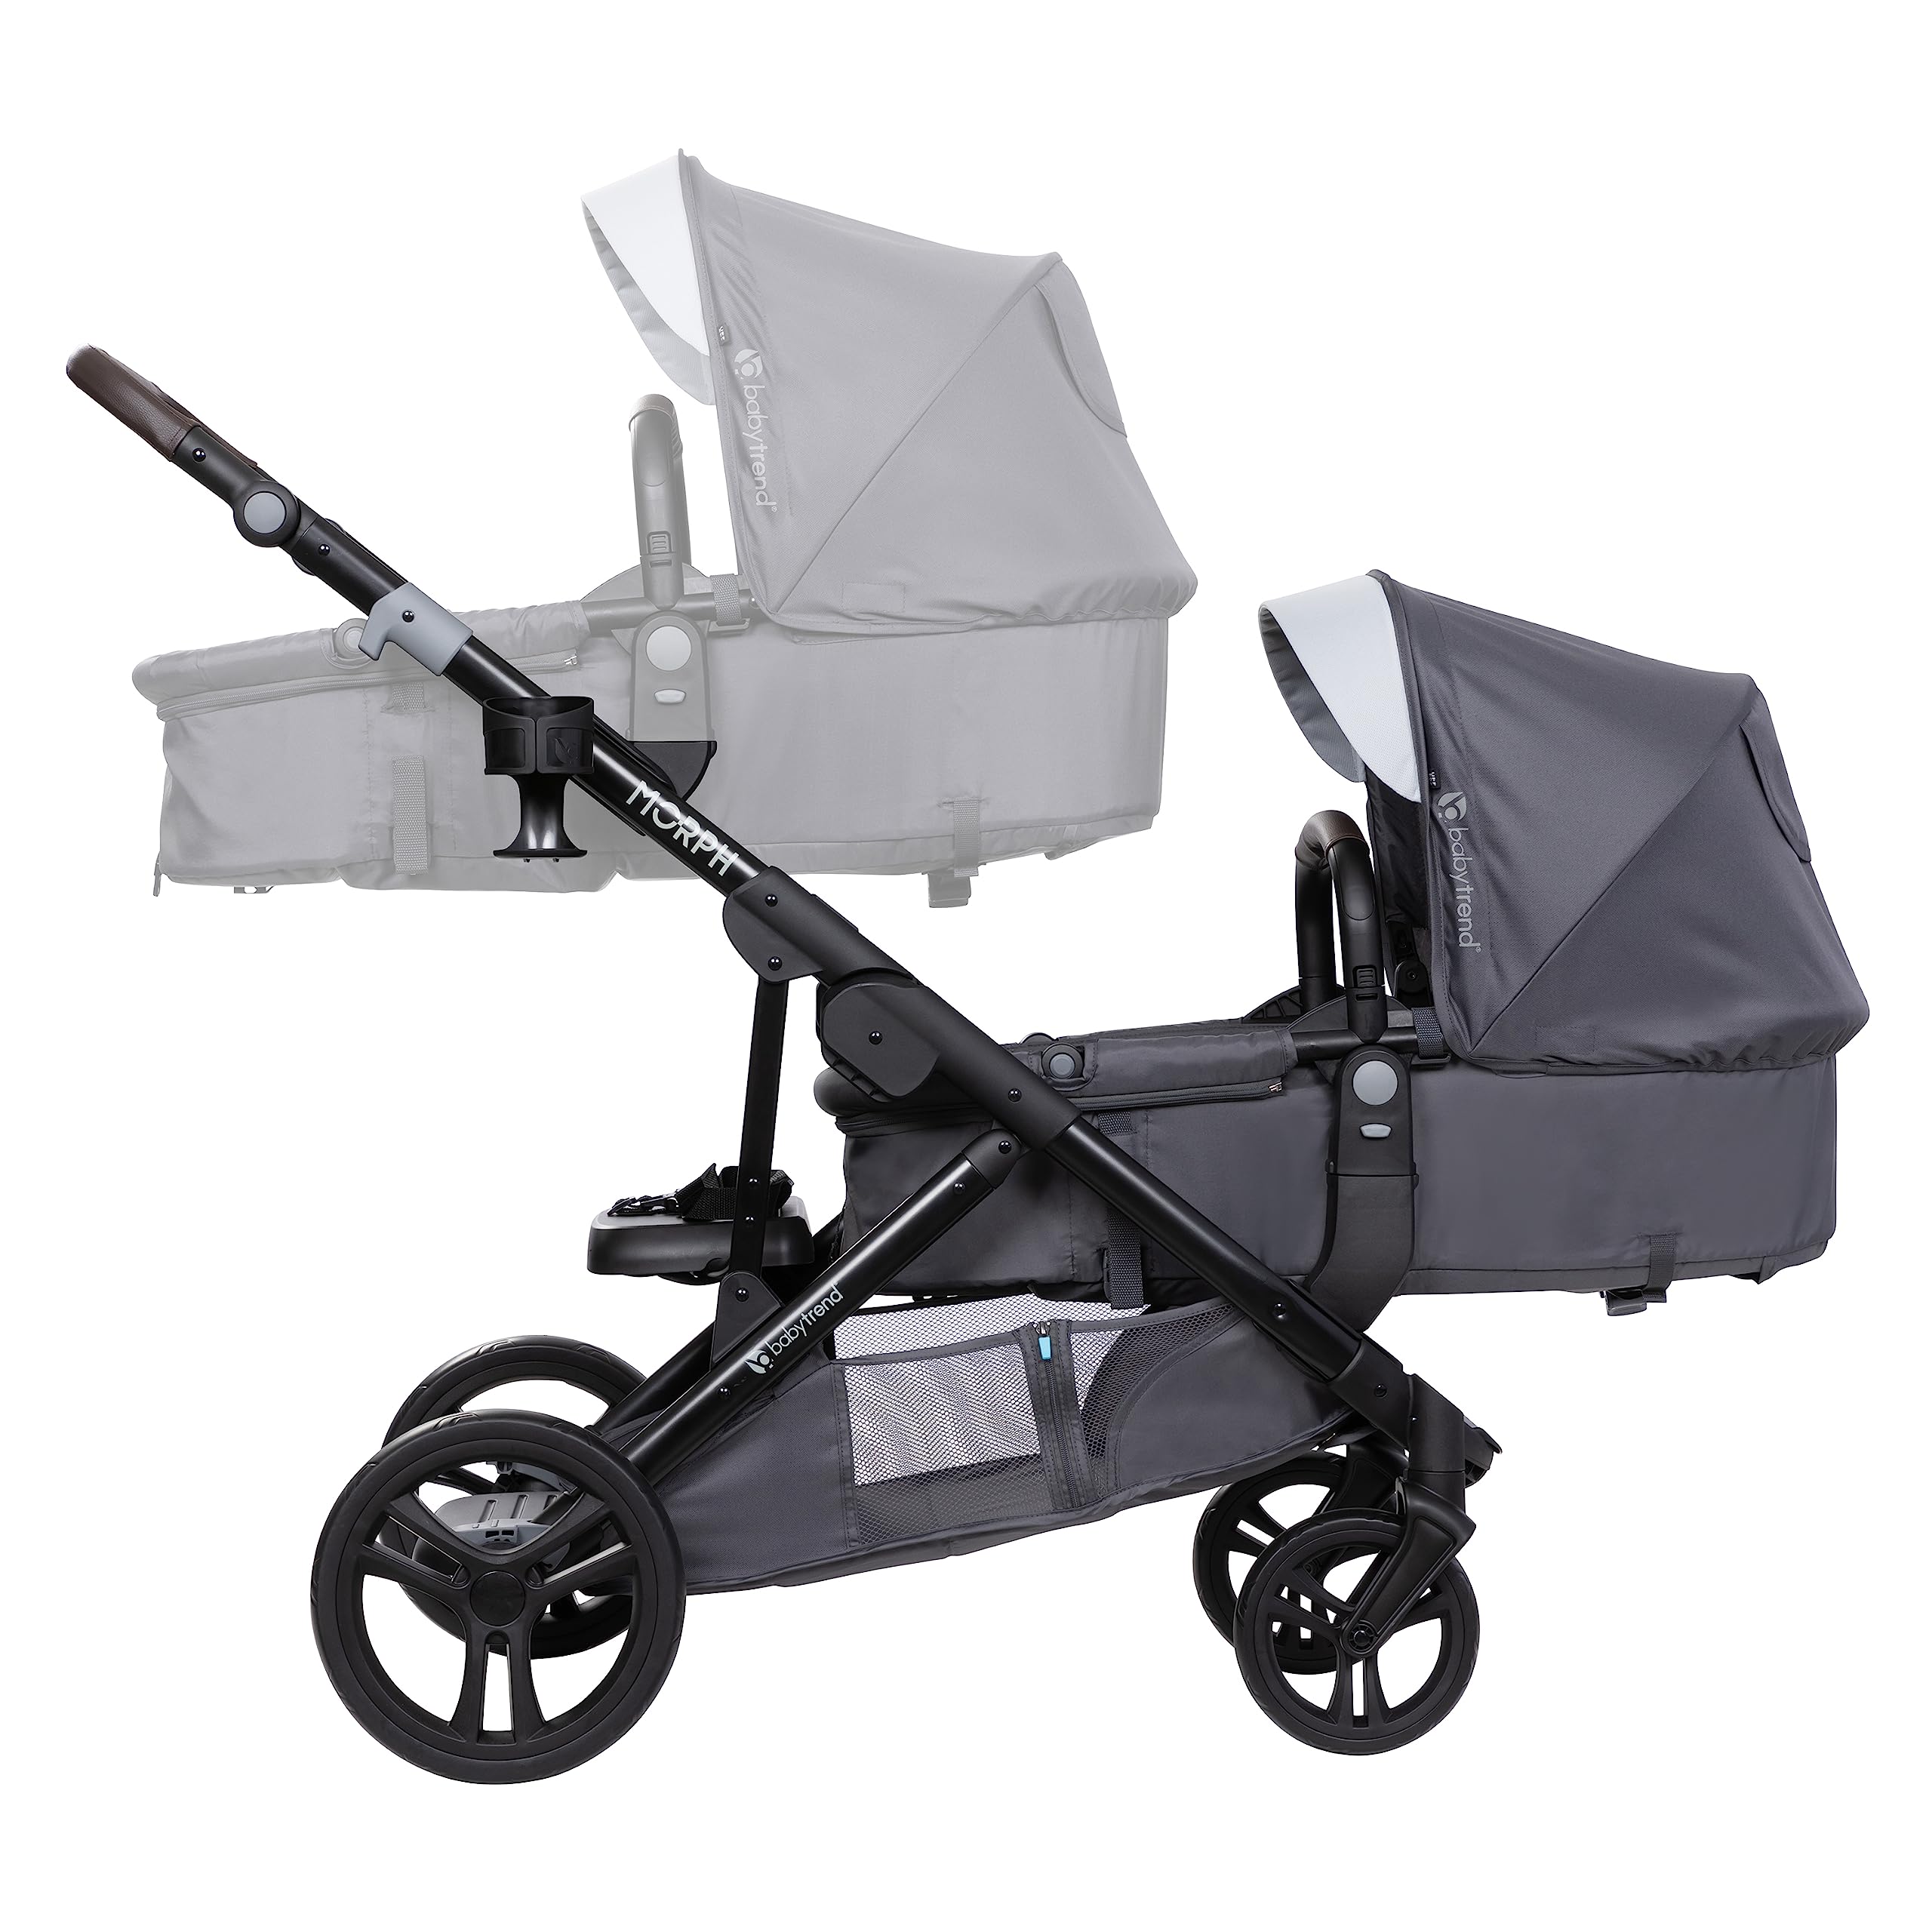 Baby Trend Second Seat for Morph Single to Double Stroller, Dash Grey